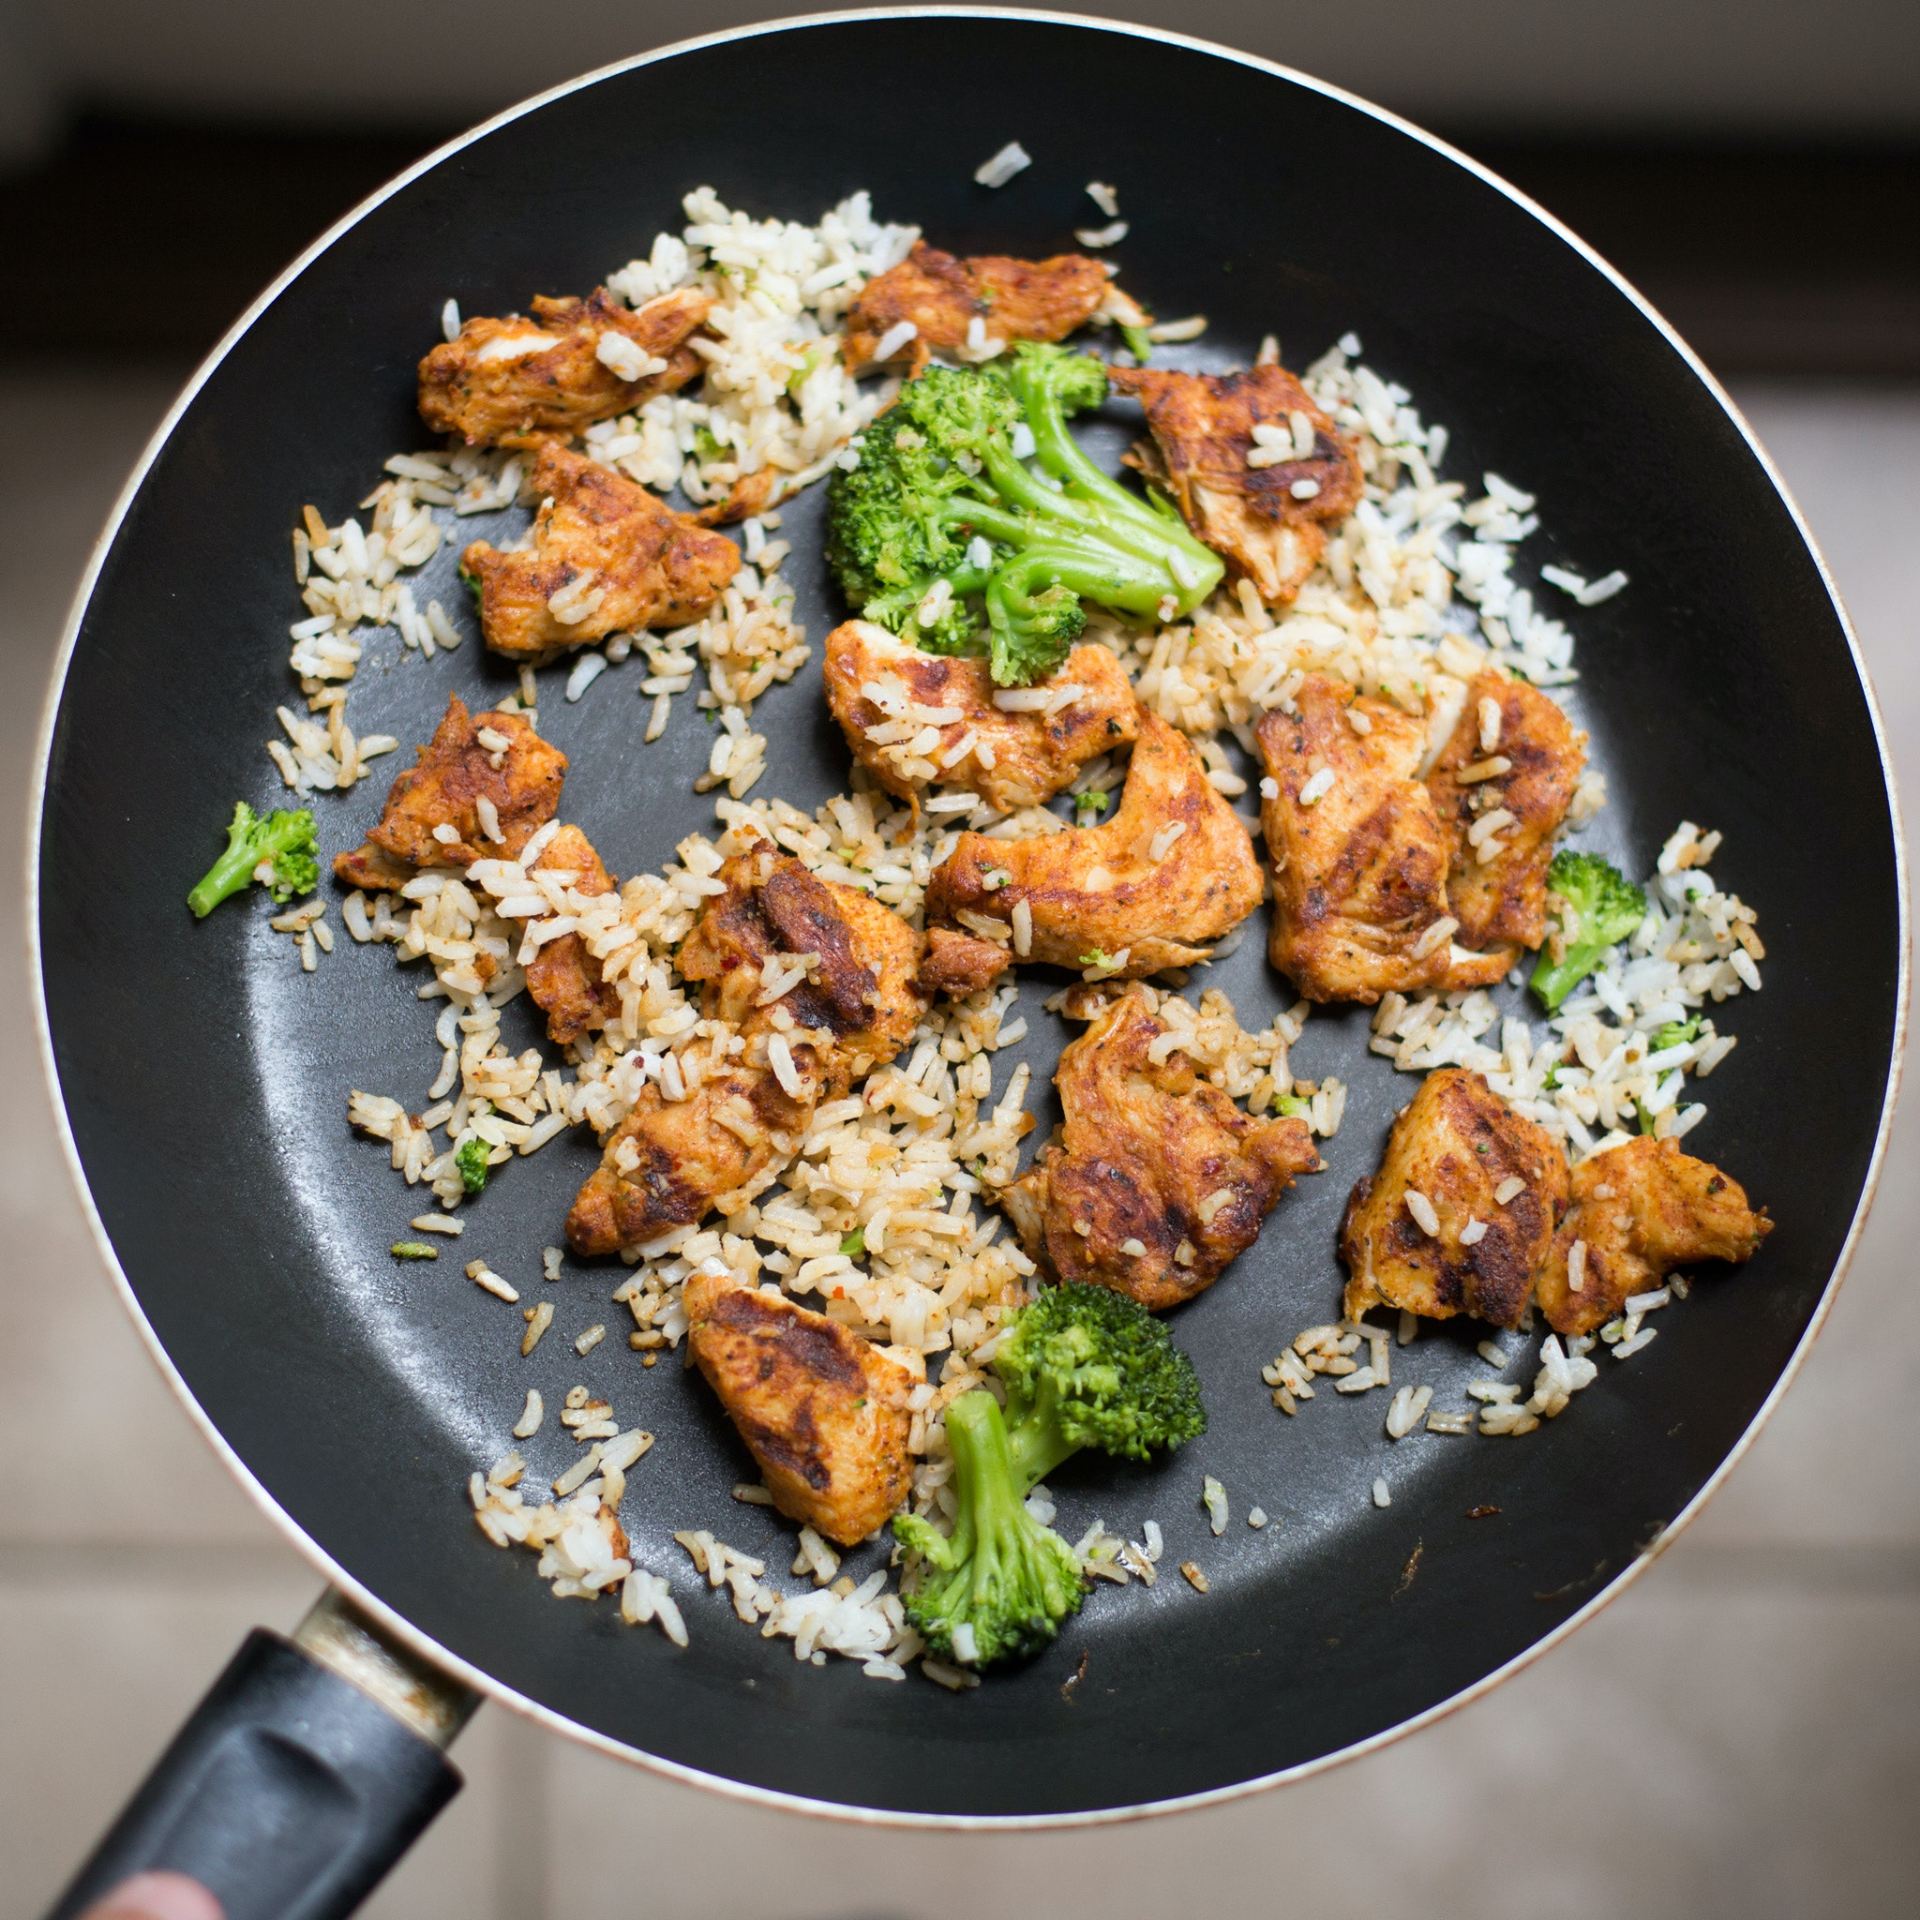 Chicken, rice and broccoli in a frying pan